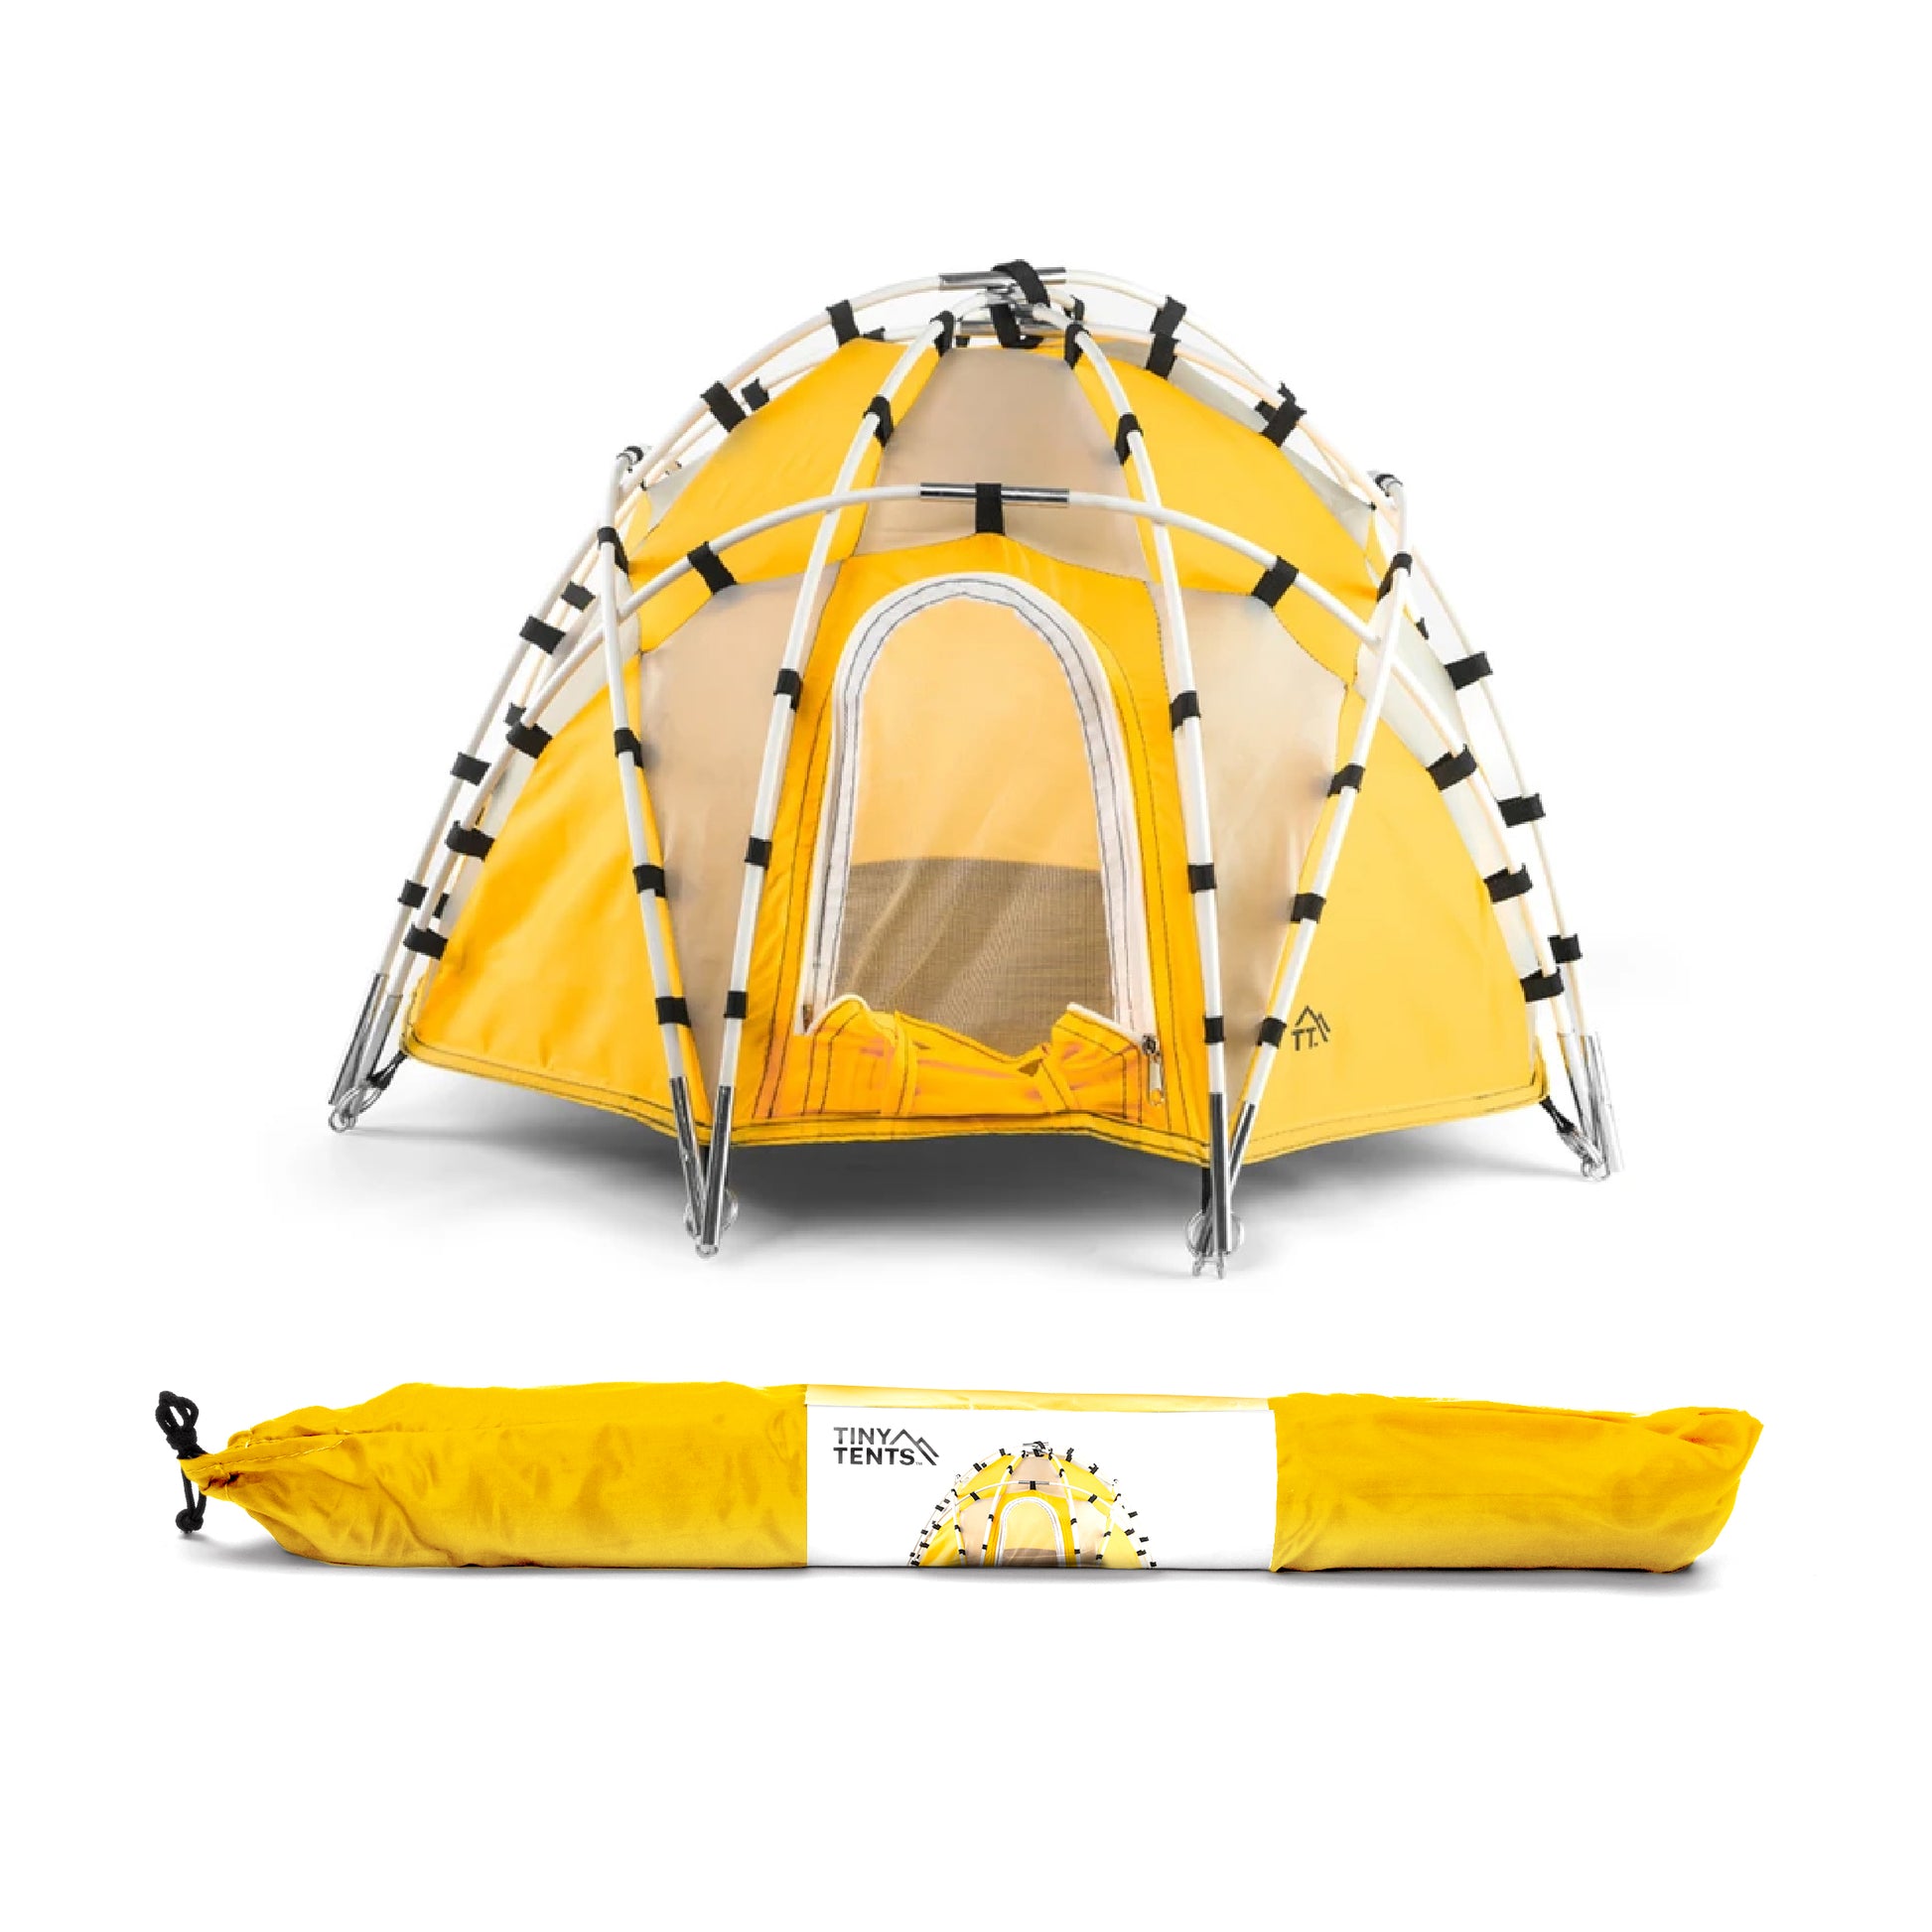 North Face Releases a Geodesic Dome Tent Capable of Withstanding